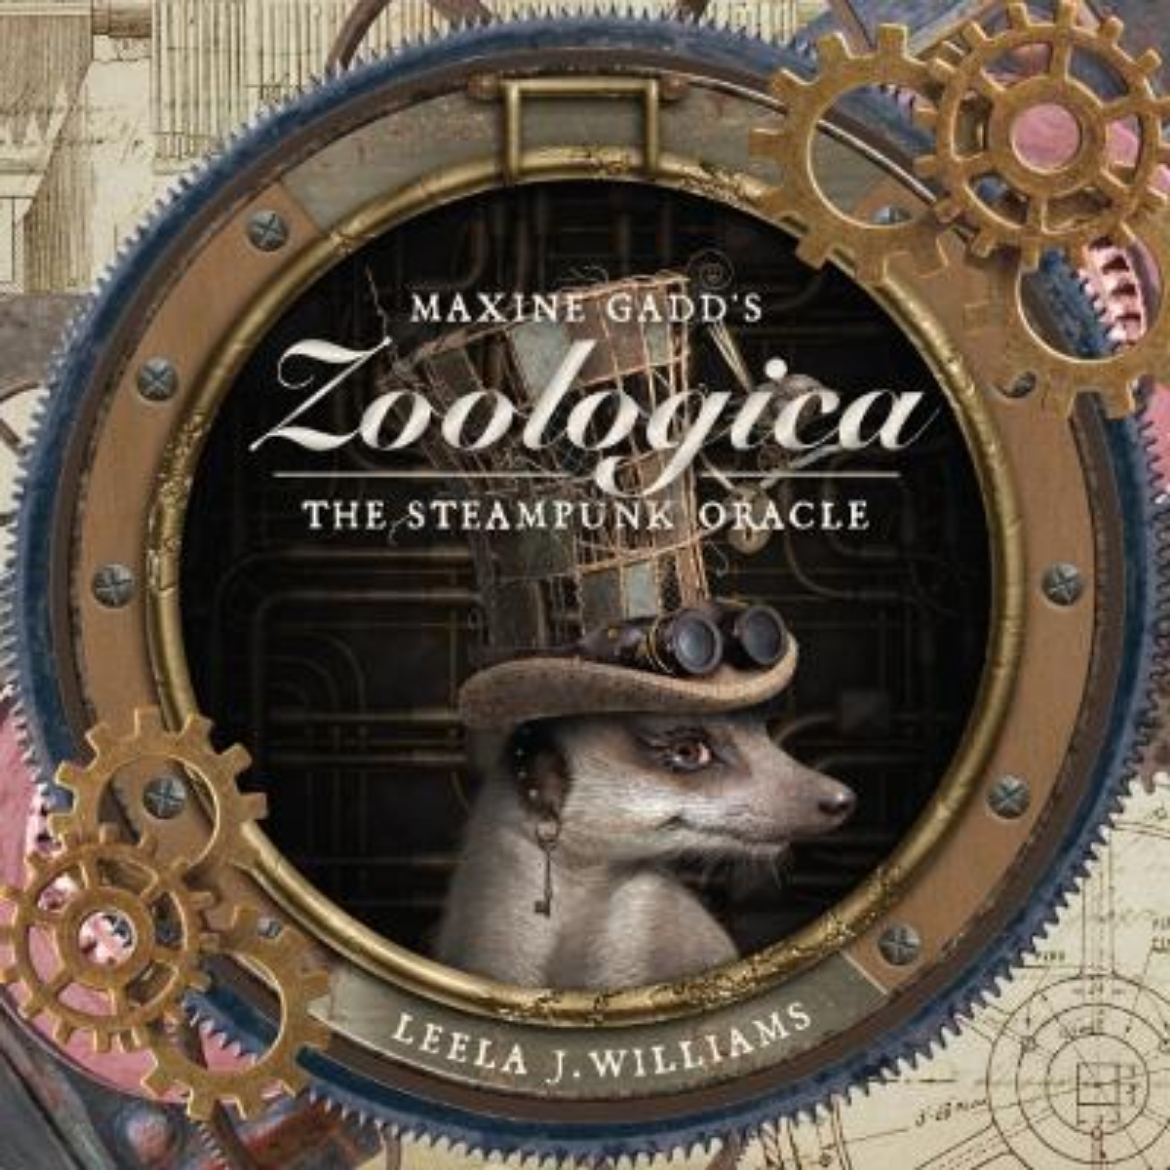 Picture of Maxine Gadd's Zoologica: The Steampunk Oracle